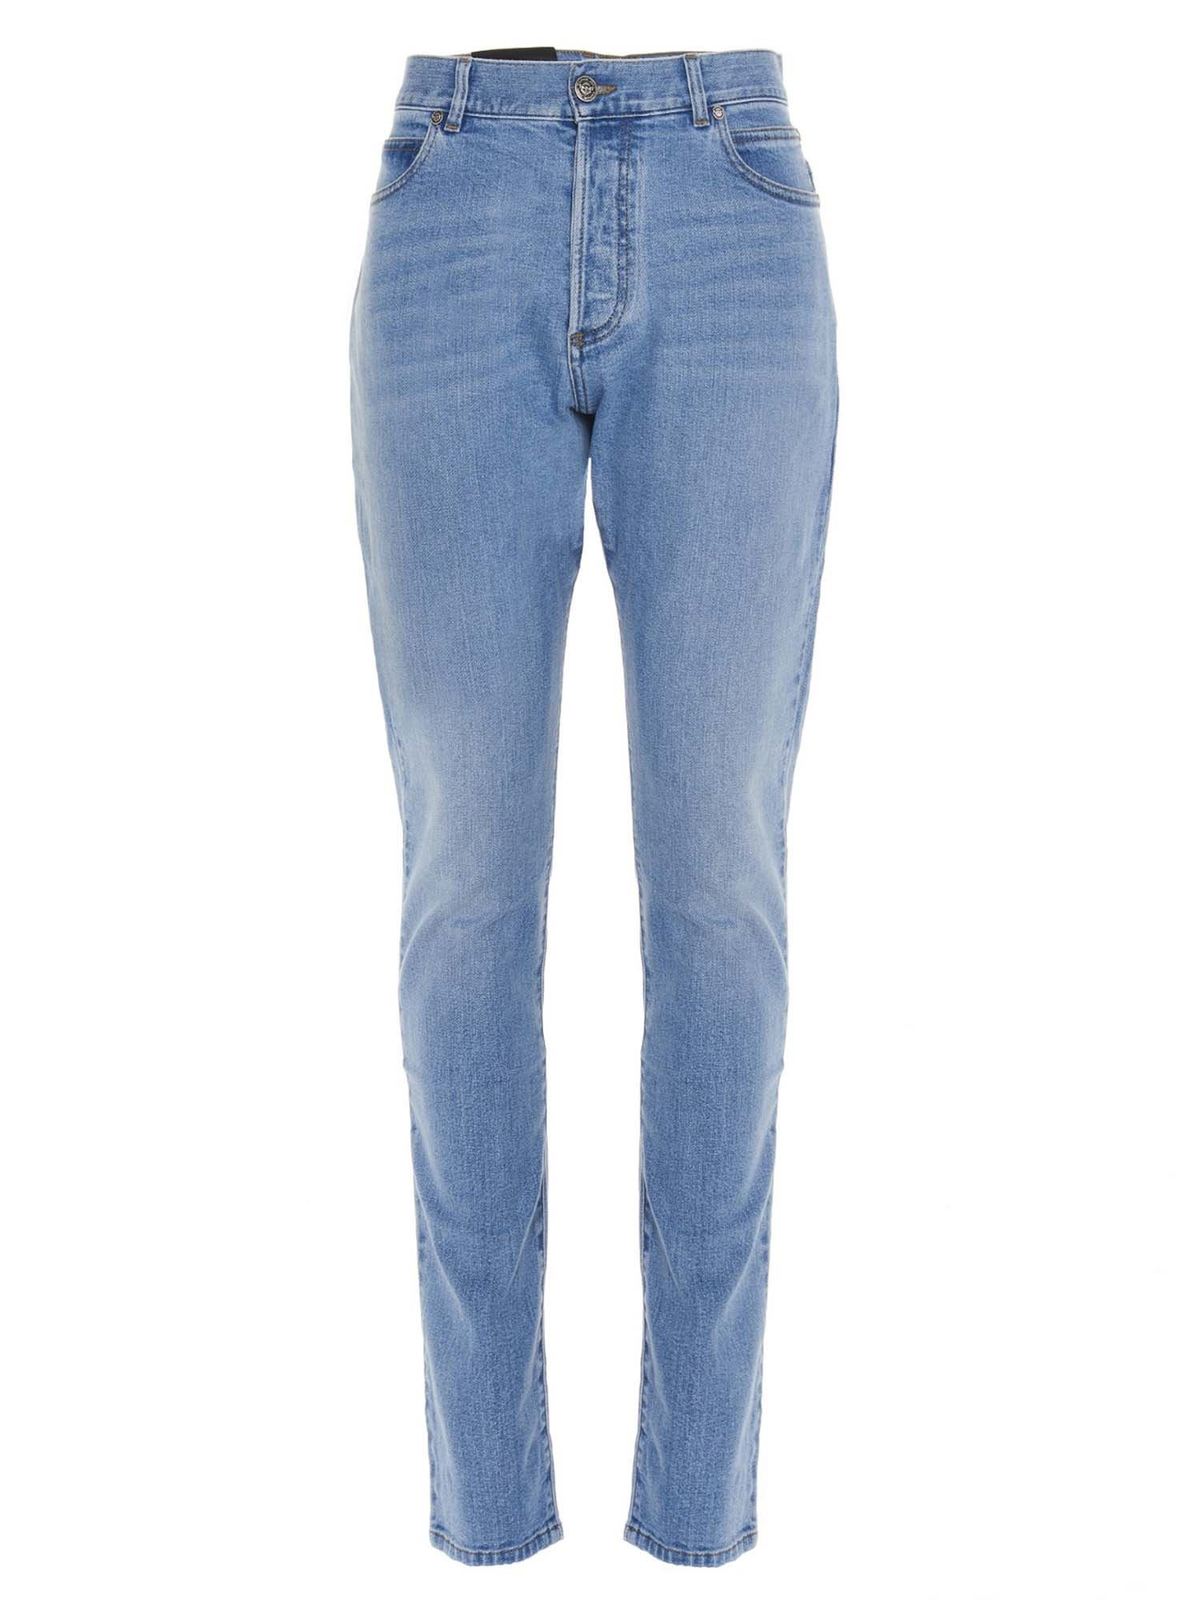 Balmain EMBROIDERED JEANS IN LIGHT BLU